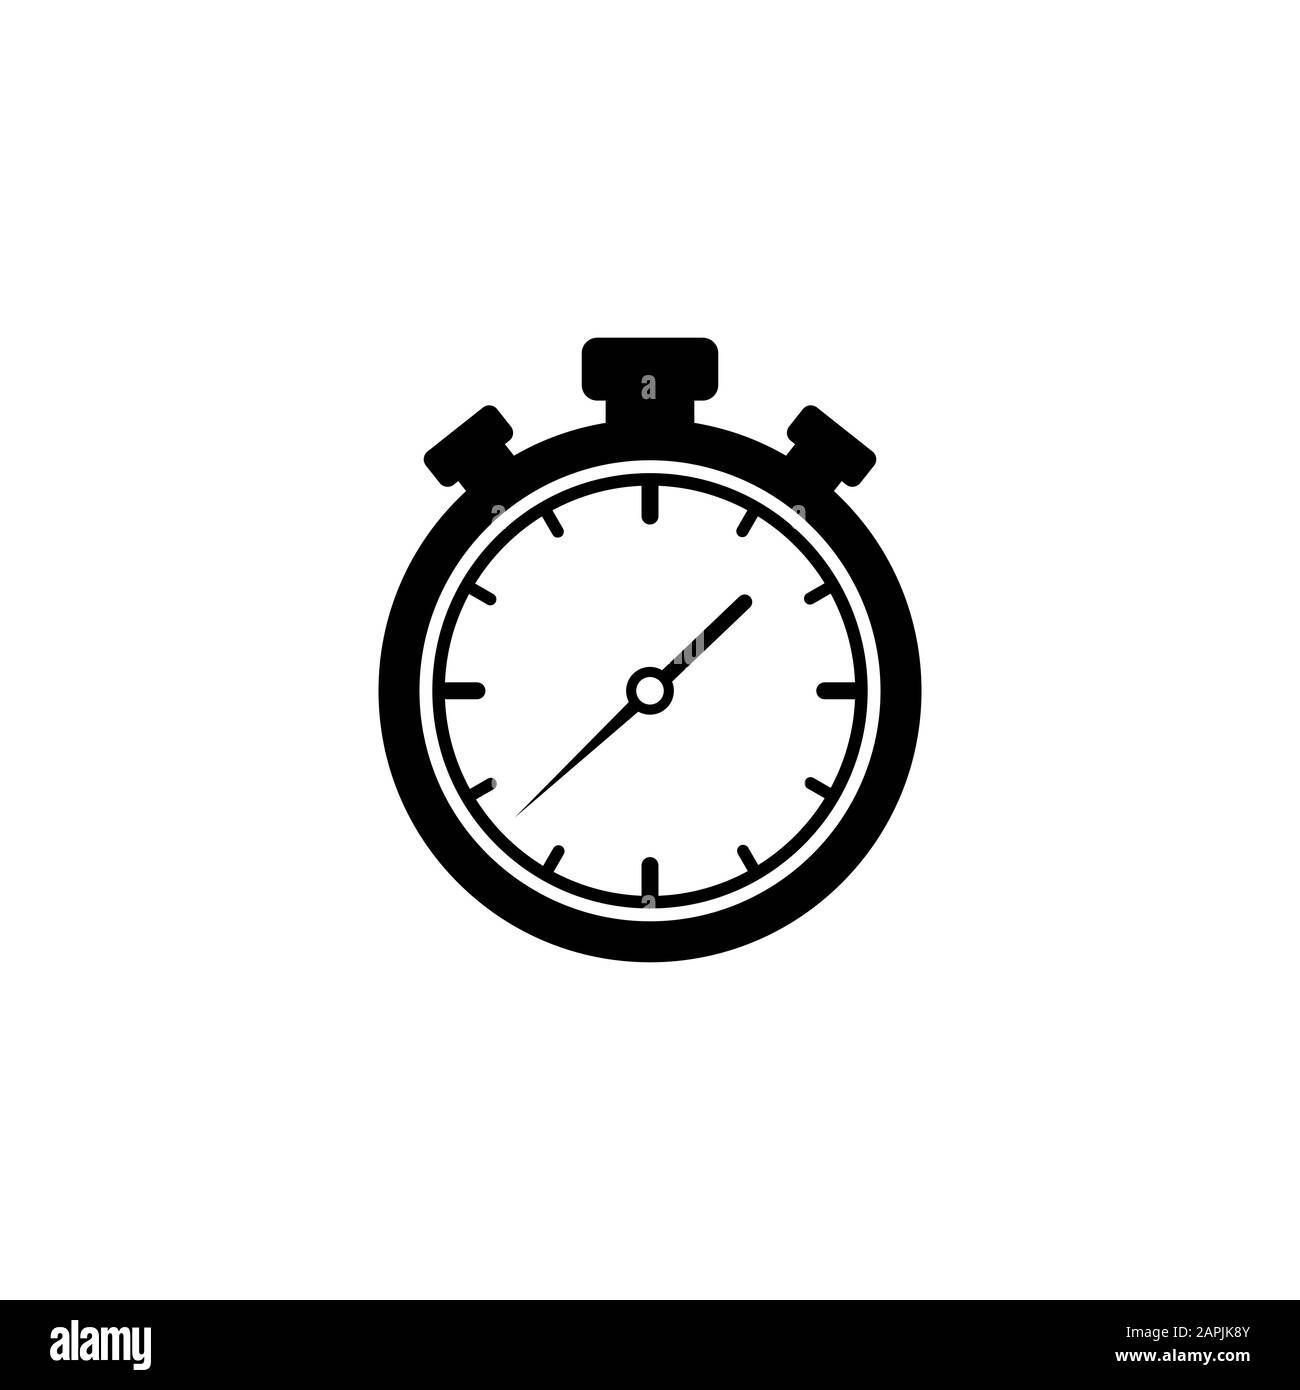 Stop time Royalty Free Vector Image - VectorStock